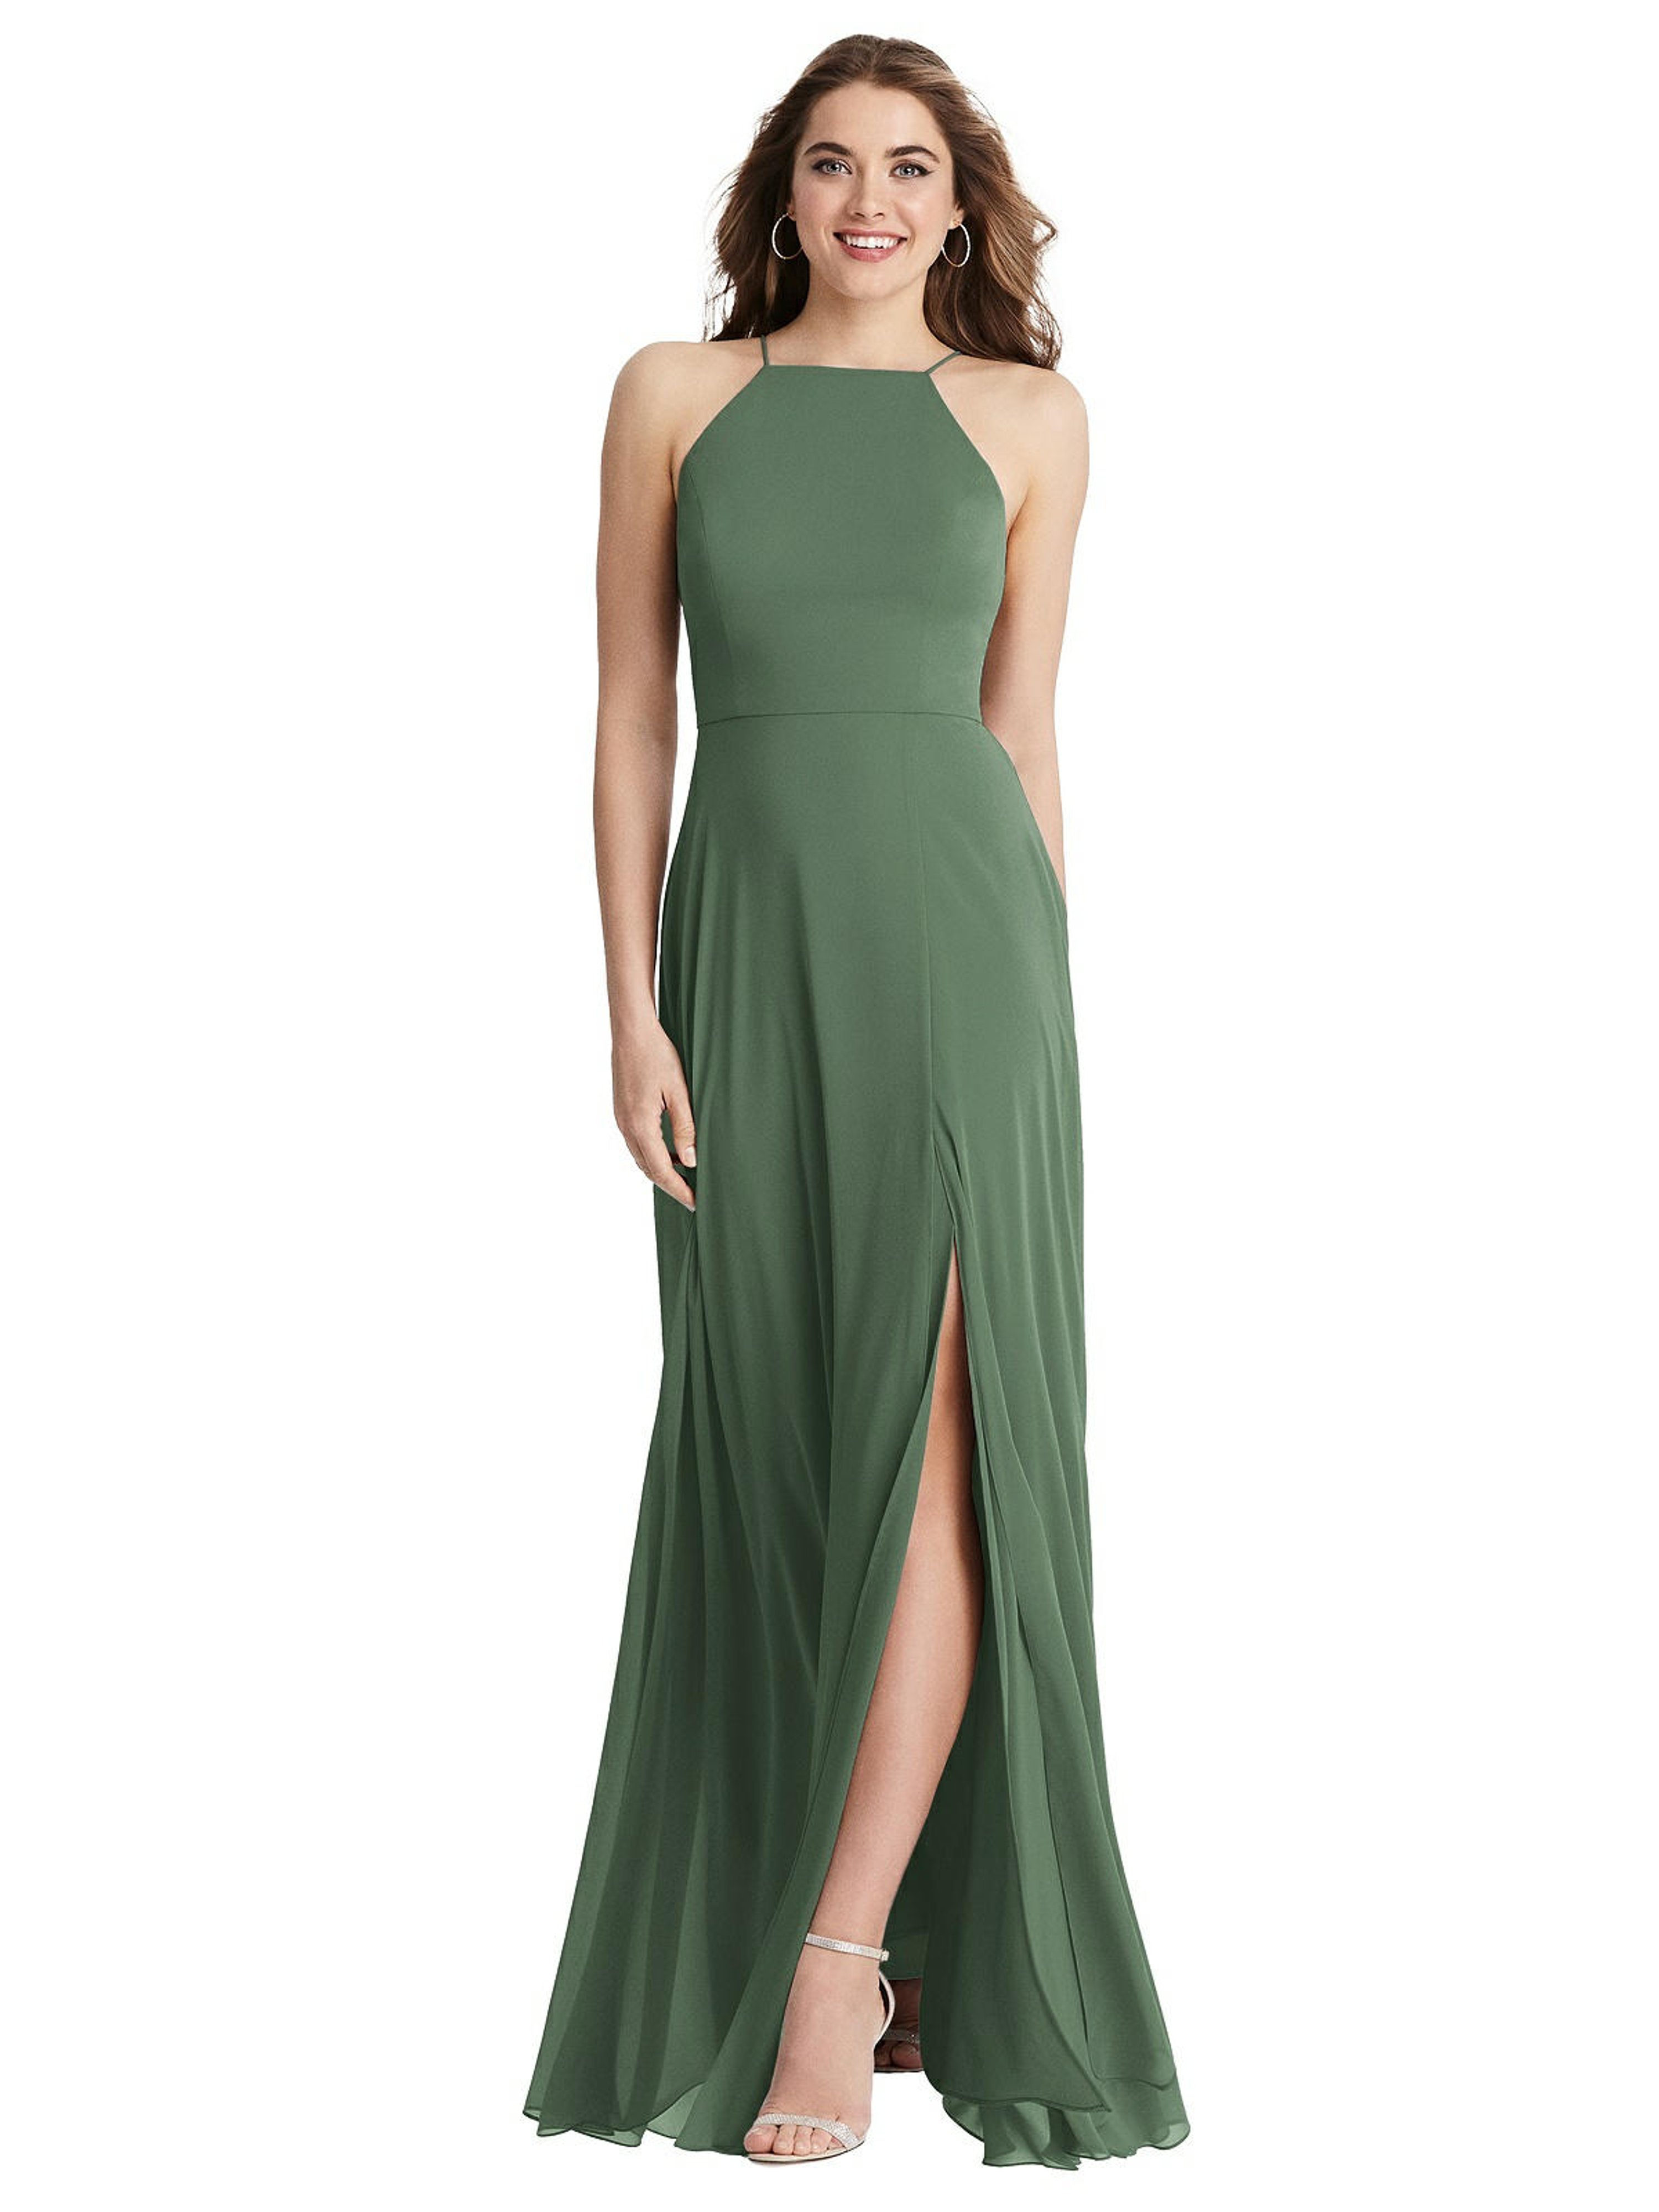 LOVELY LOVELY HIGH NECK CHIFFON MAXI DRESS WITH FRONT SLIT